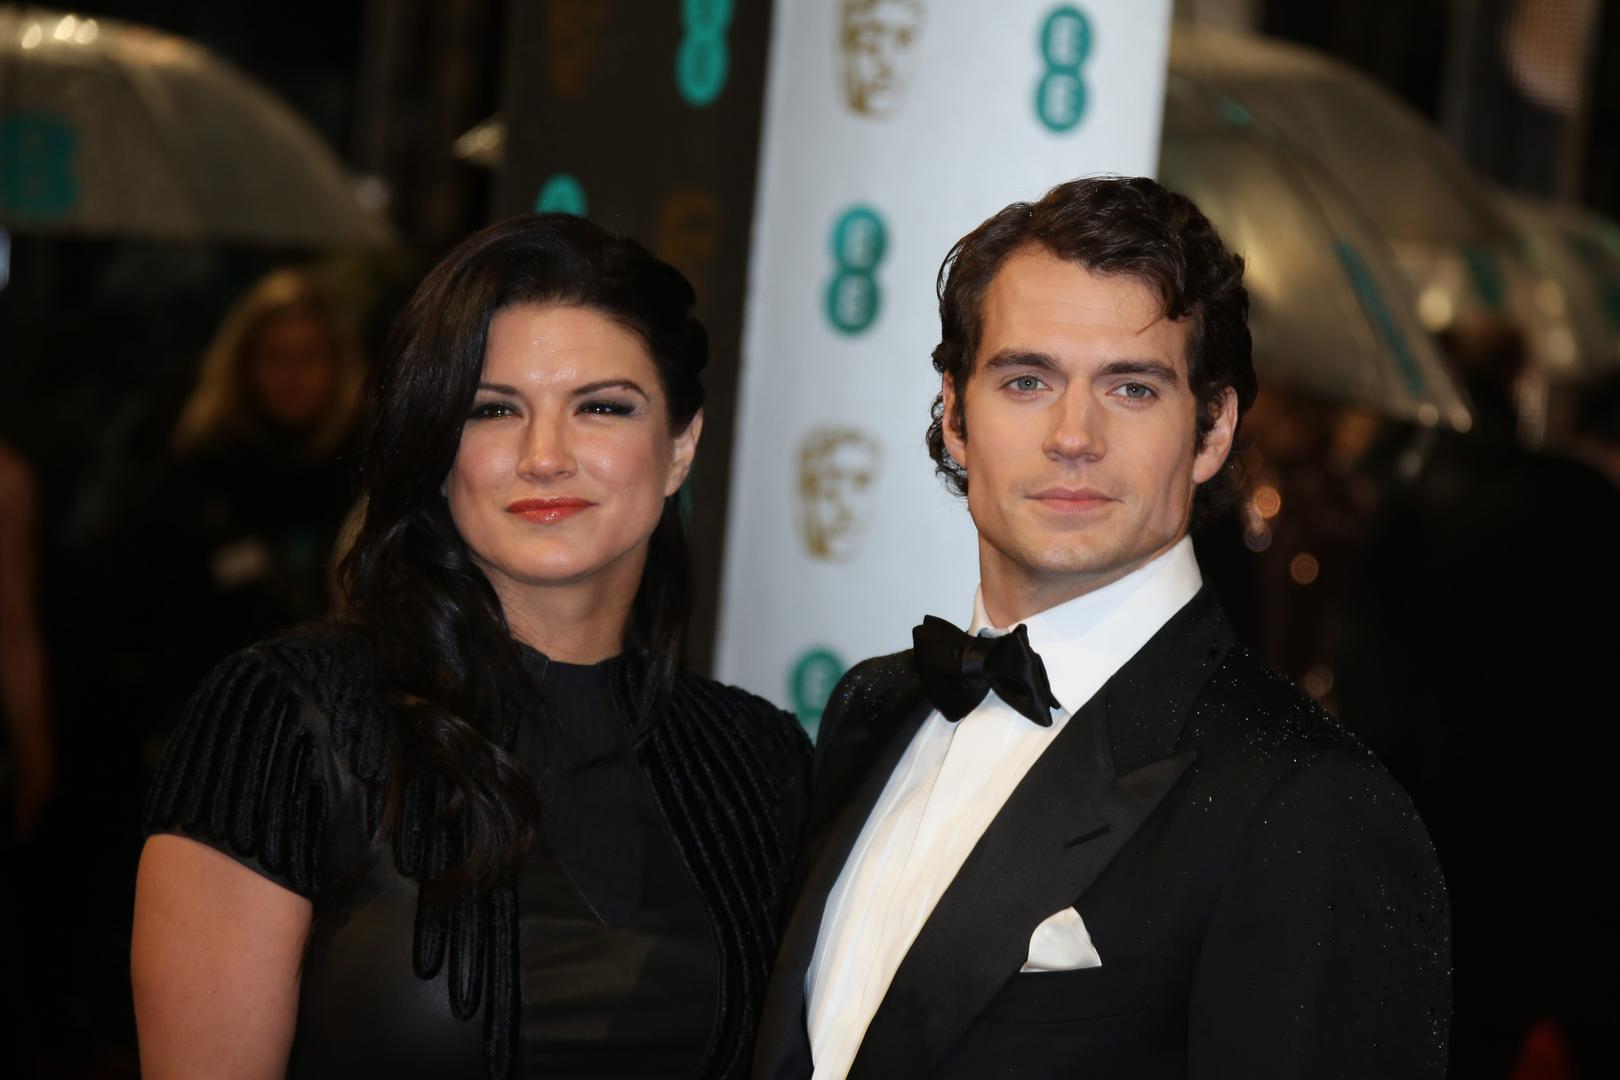 Actors Henry Cavill and Gina Carano arrive at the EE British Academy Film Awards at The Royal Opera House in London, England, on 10 February 2013. Photo: Hubert Boesl/DPA/PIXSELL